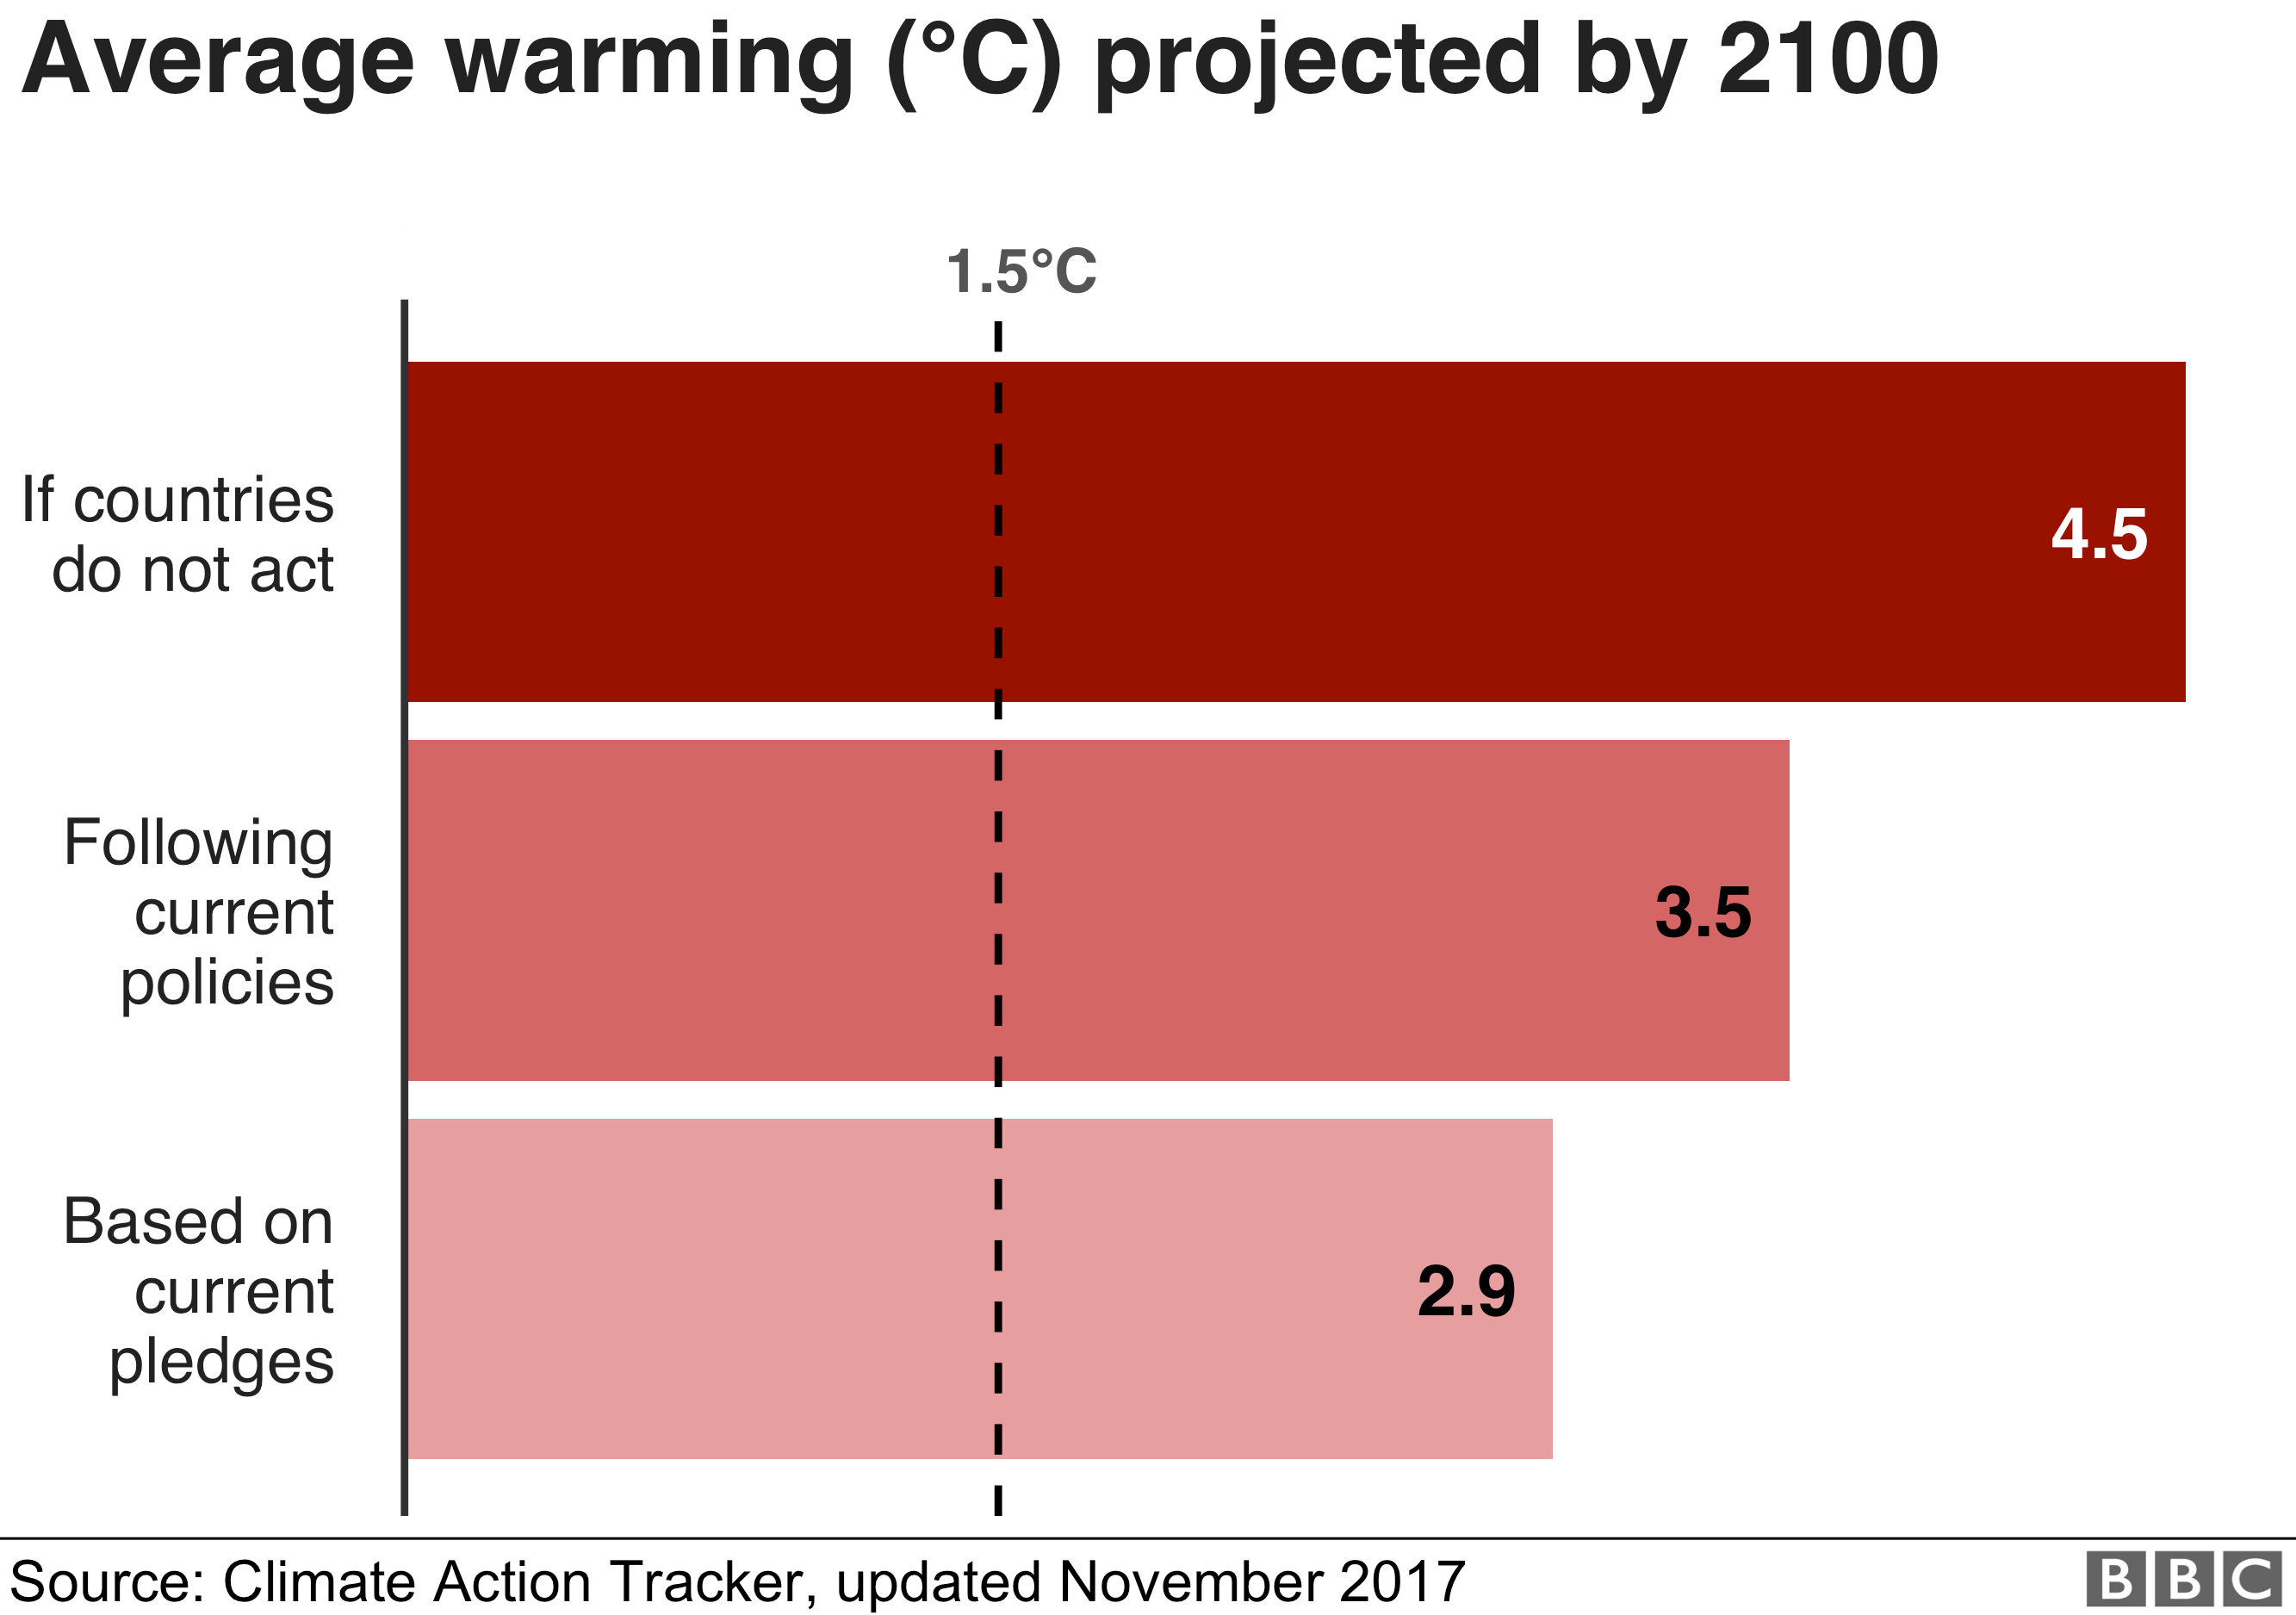 Chart showing the average warming by 2100